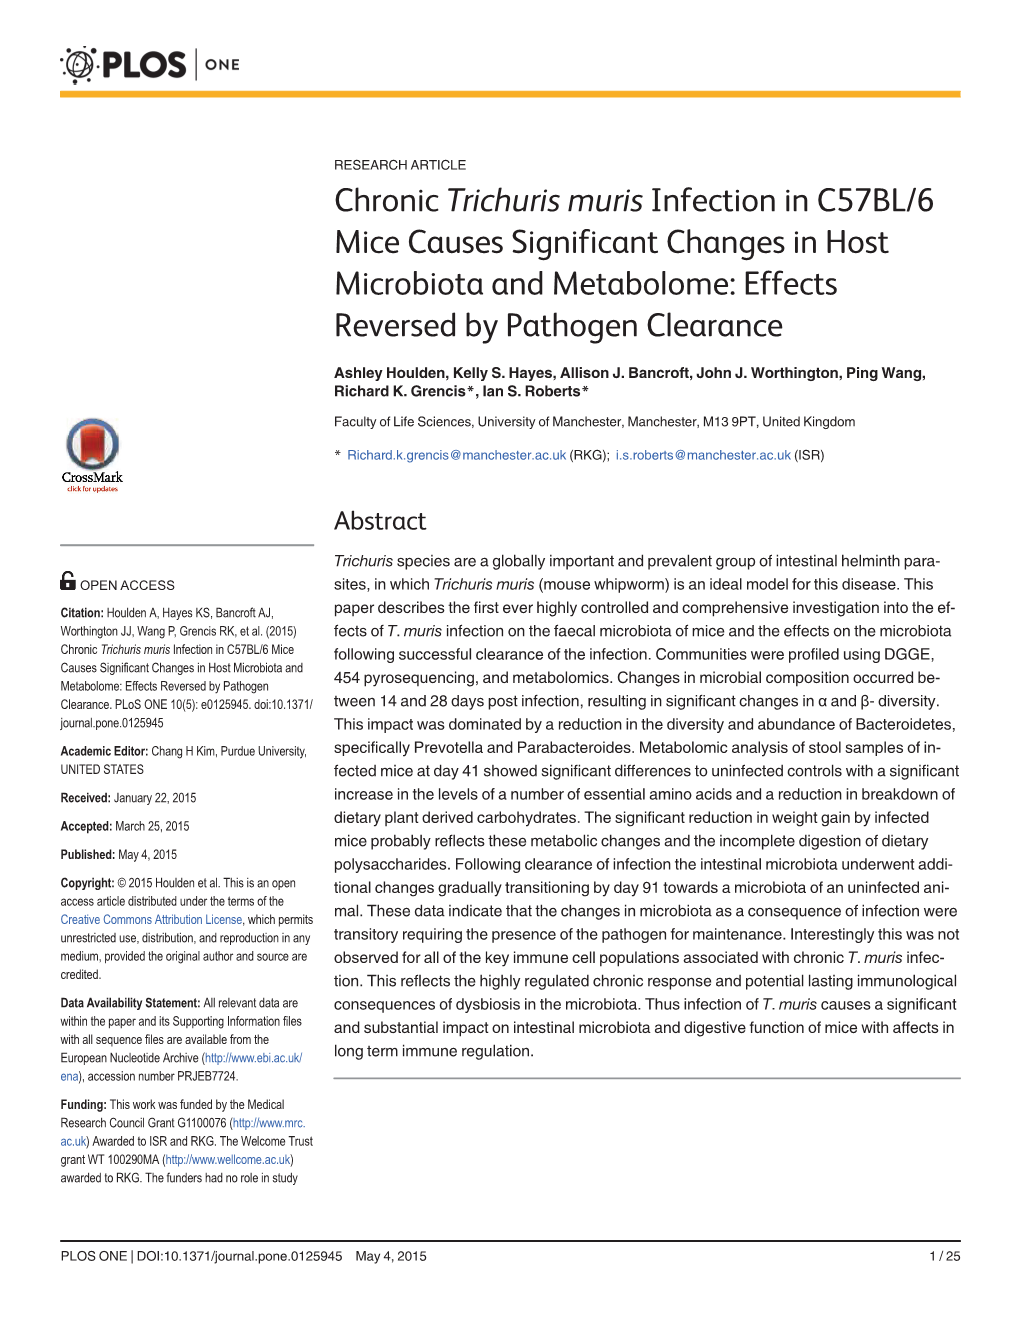 Chronic Trichuris Muris Infection in C57BL/6 Mice Causes Significant Changes in Host Microbiota and Metabolome: Effects Reversed by Pathogen Clearance